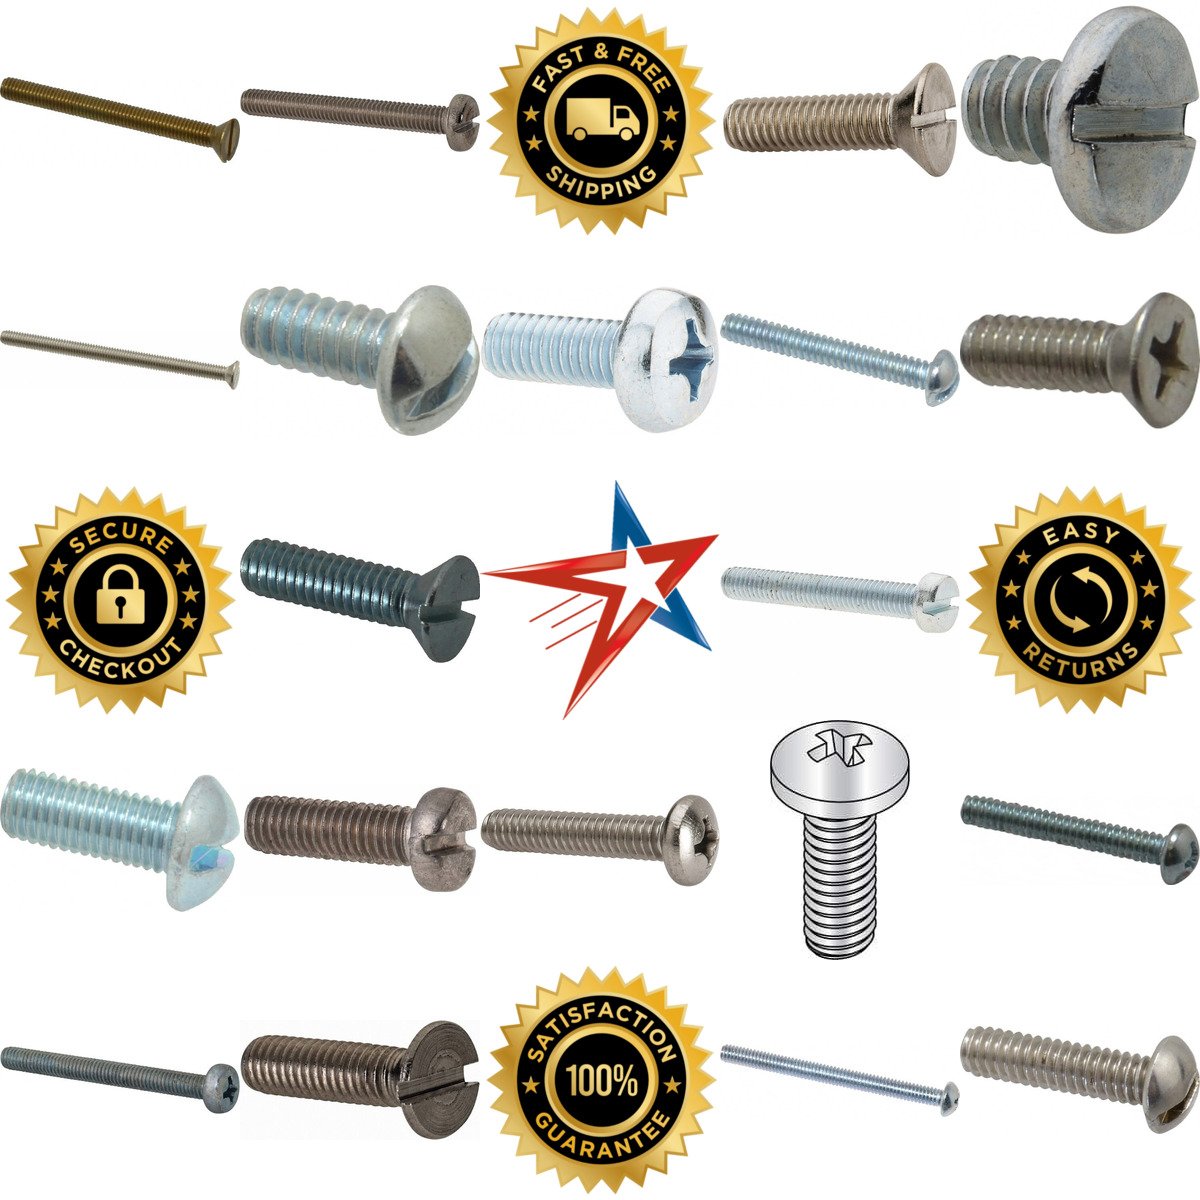 A selection of Machine Screws products on GoVets